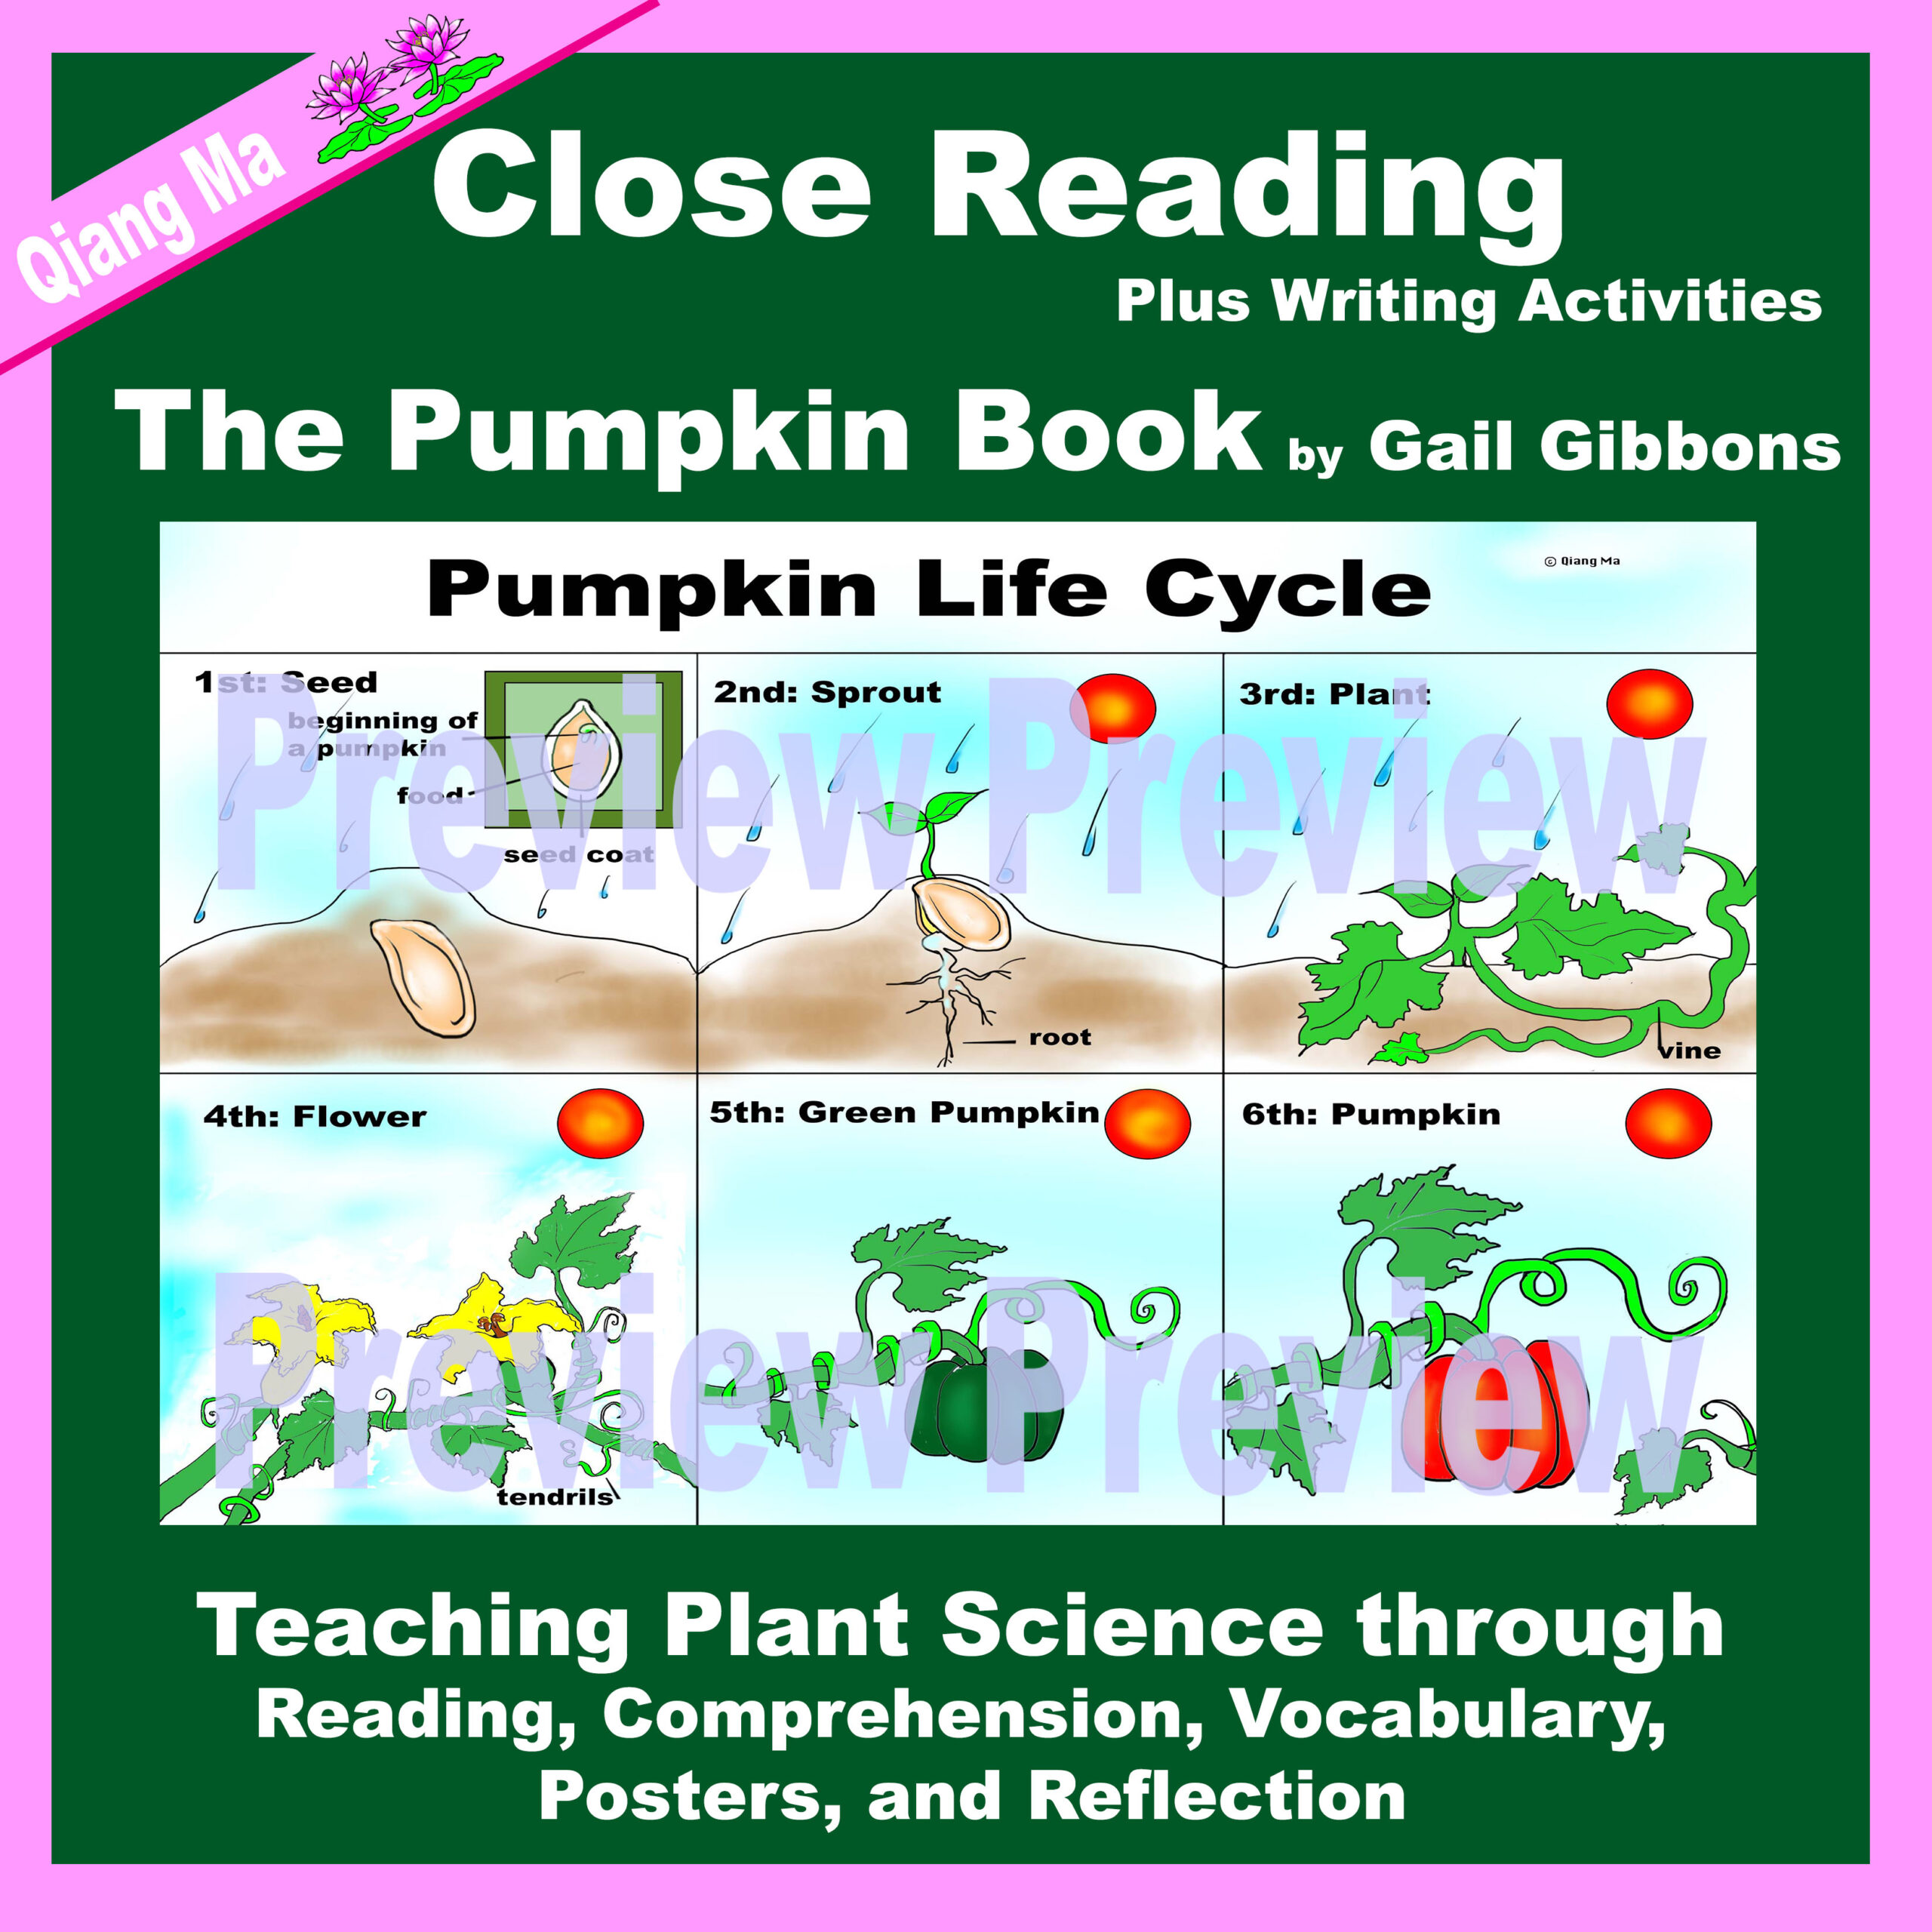 Close Reading: The Pumpkin Book by Gail Gibbons